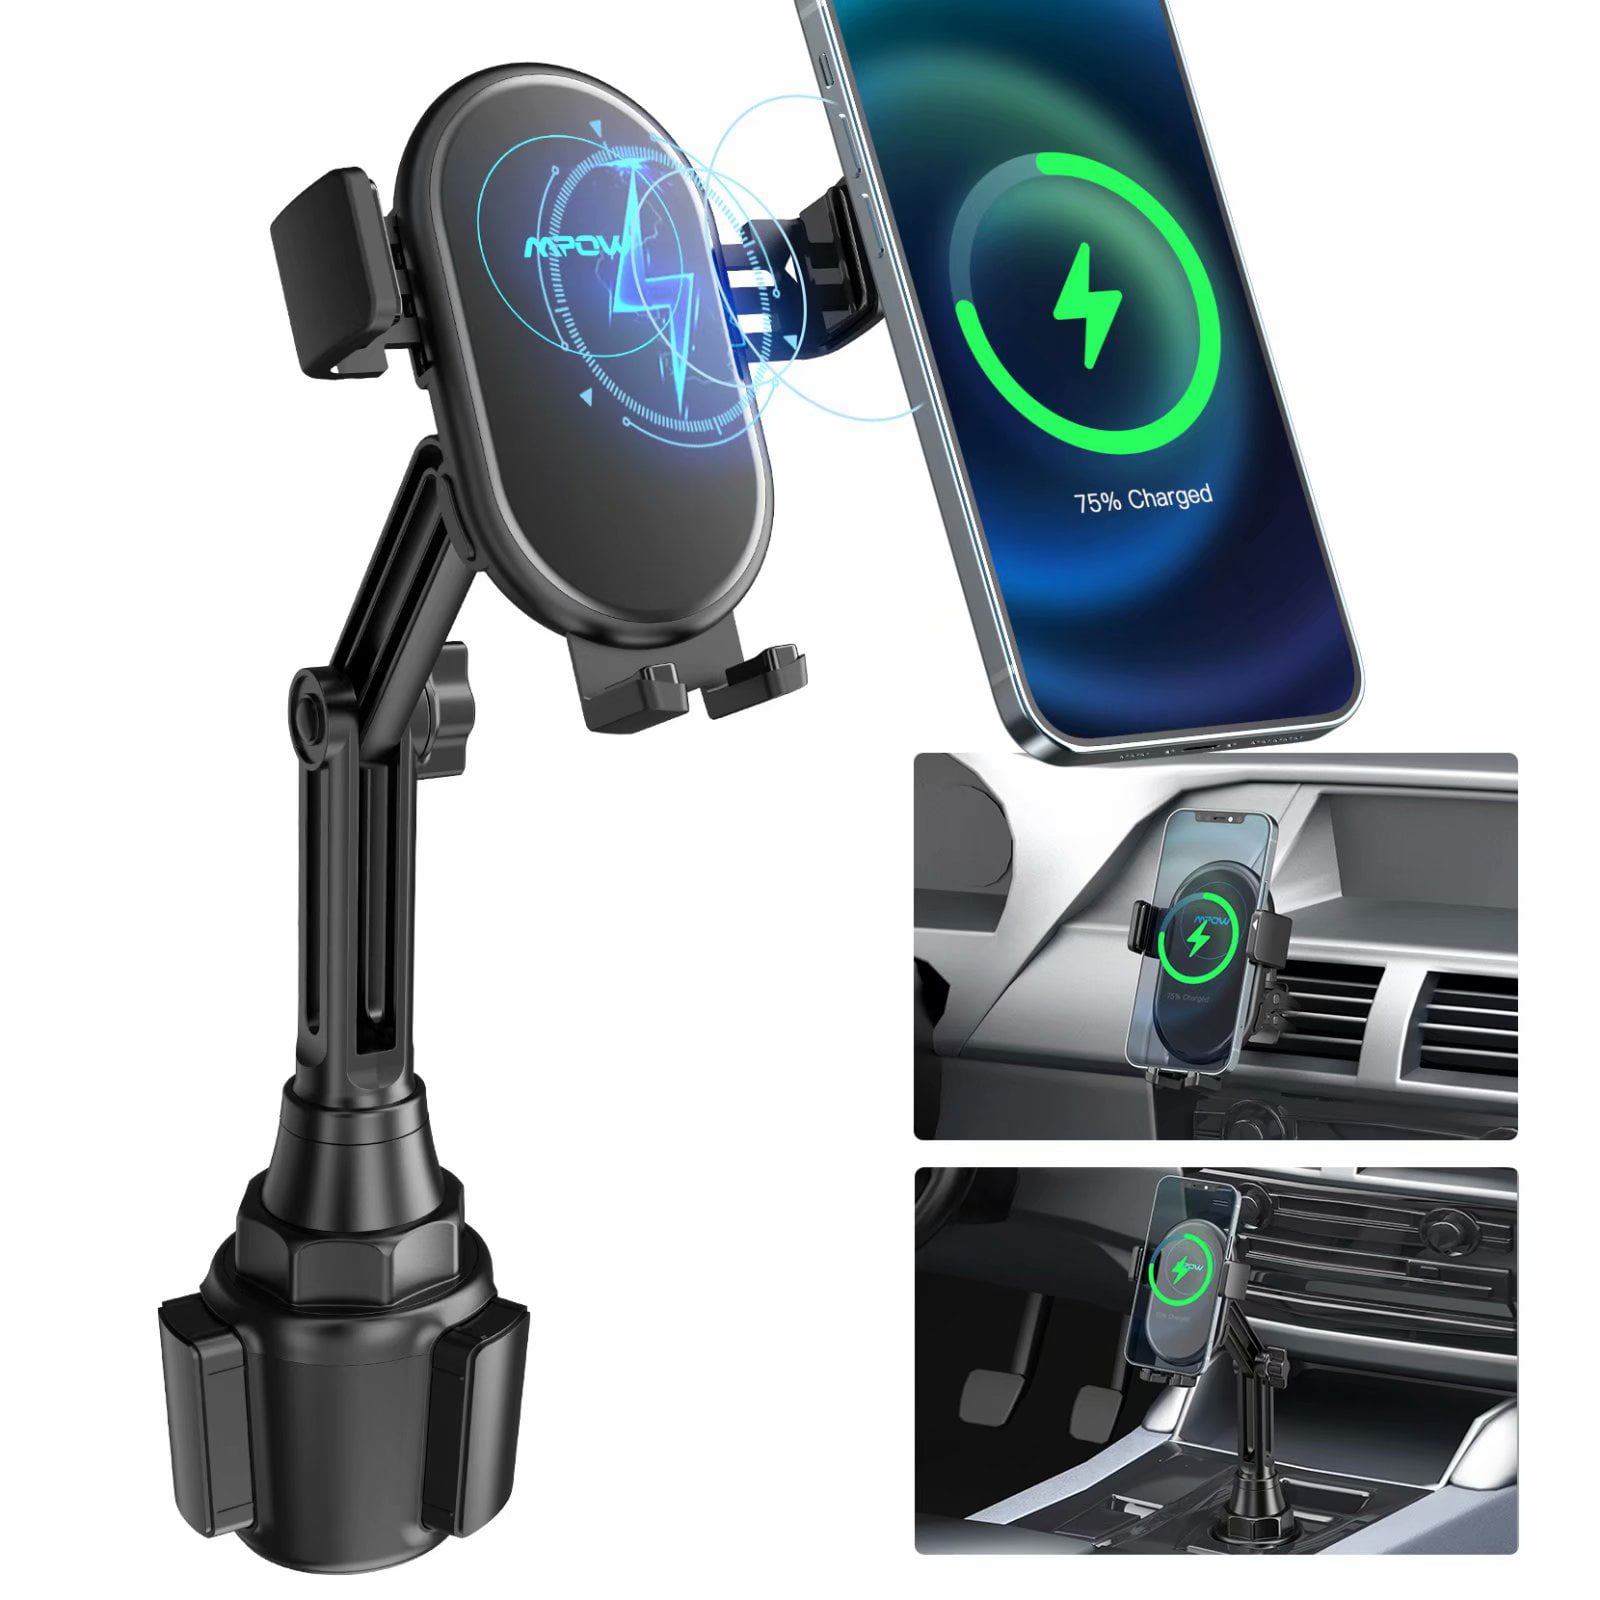 Mpow Car Wireless Charger Cup Holder Air Vent Phone Holder for iPhone SE/11/11 Pro LG G8 ThinQ/V50/V40 15W Auto-Clamping Qi Fast Charging Car Mount with Built-in Battery Galaxy S20/S20+ 